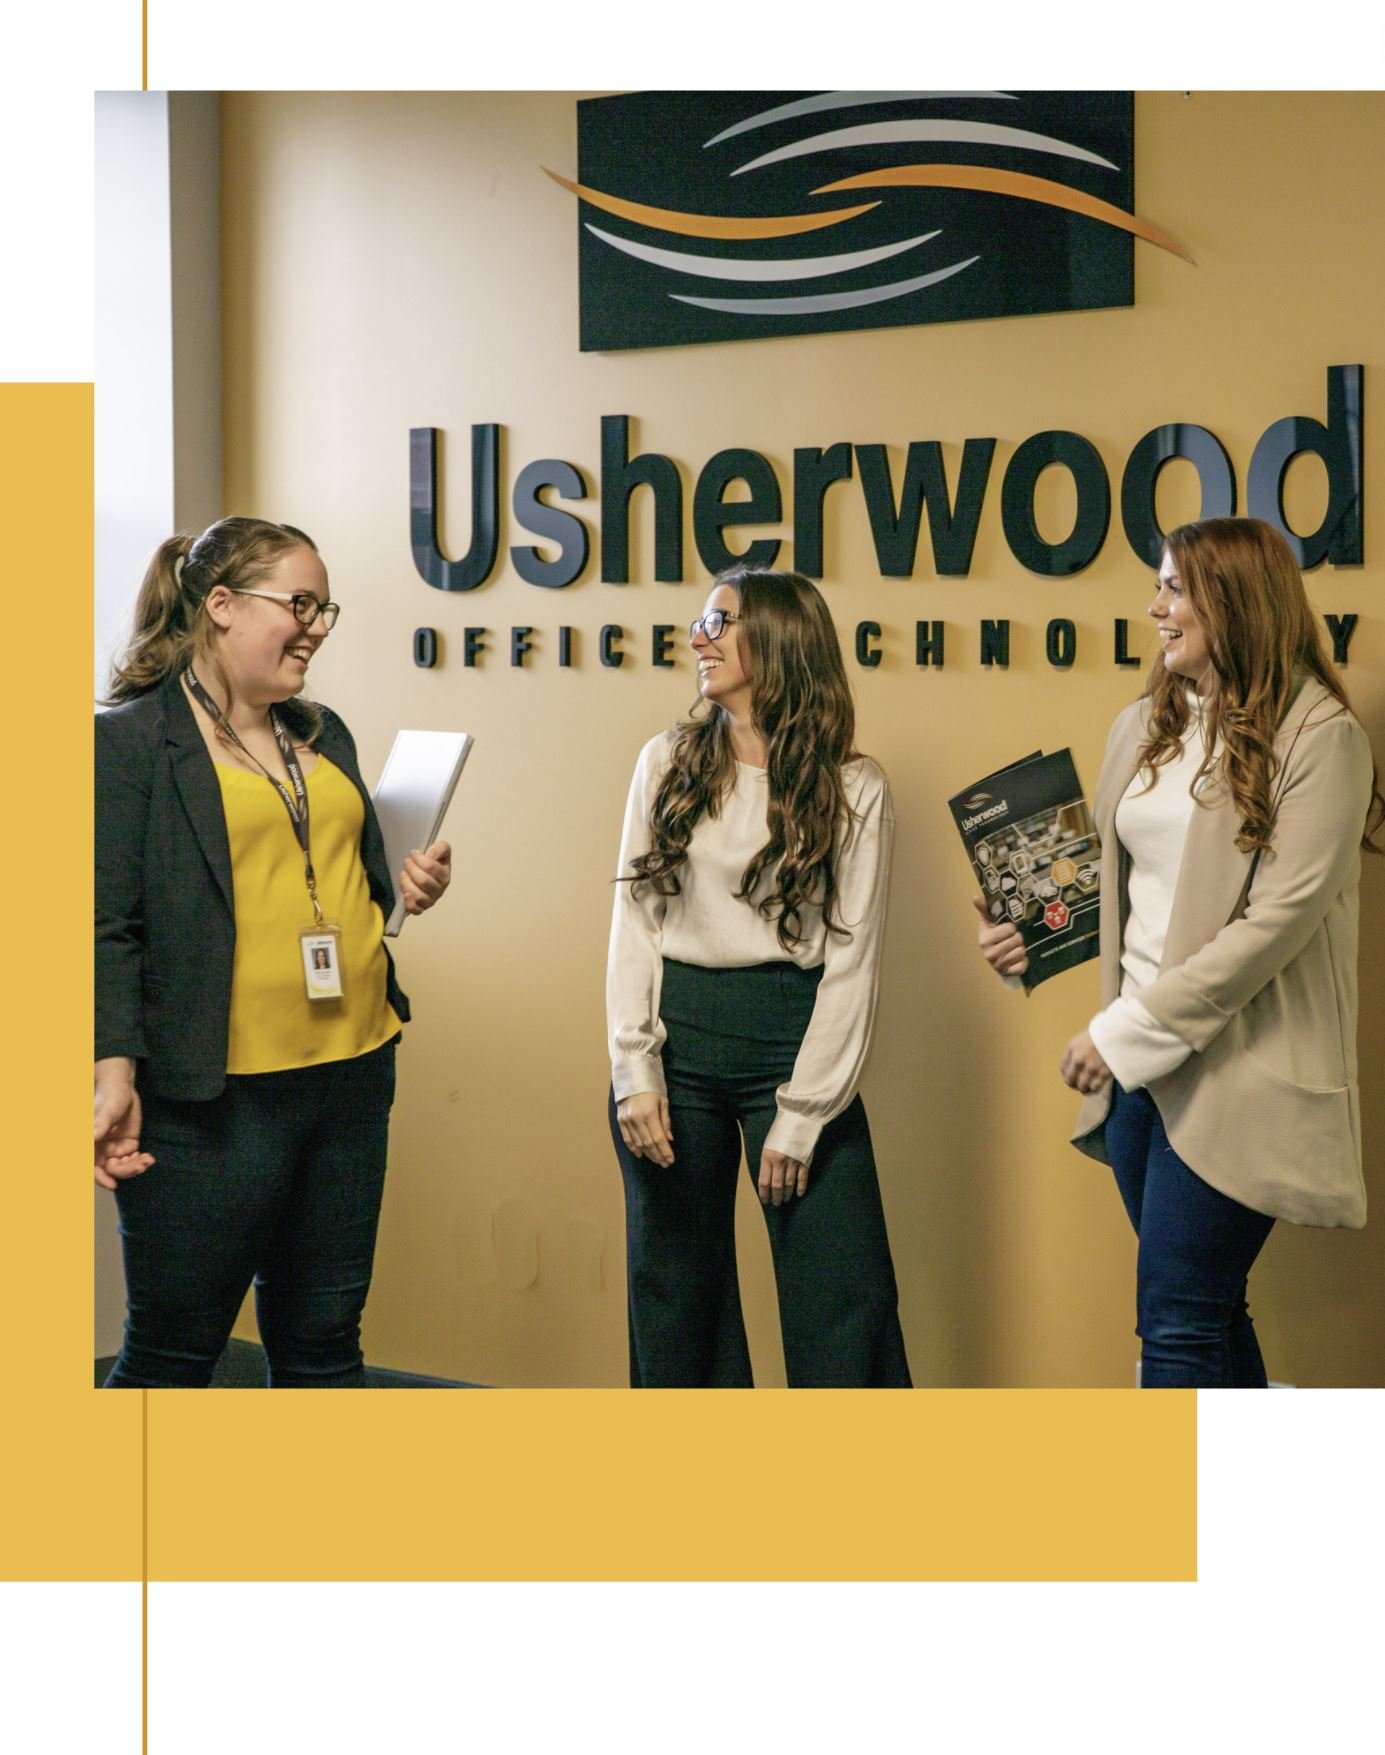 Three women employees standing, talking and smiling in front of Usherwood sign